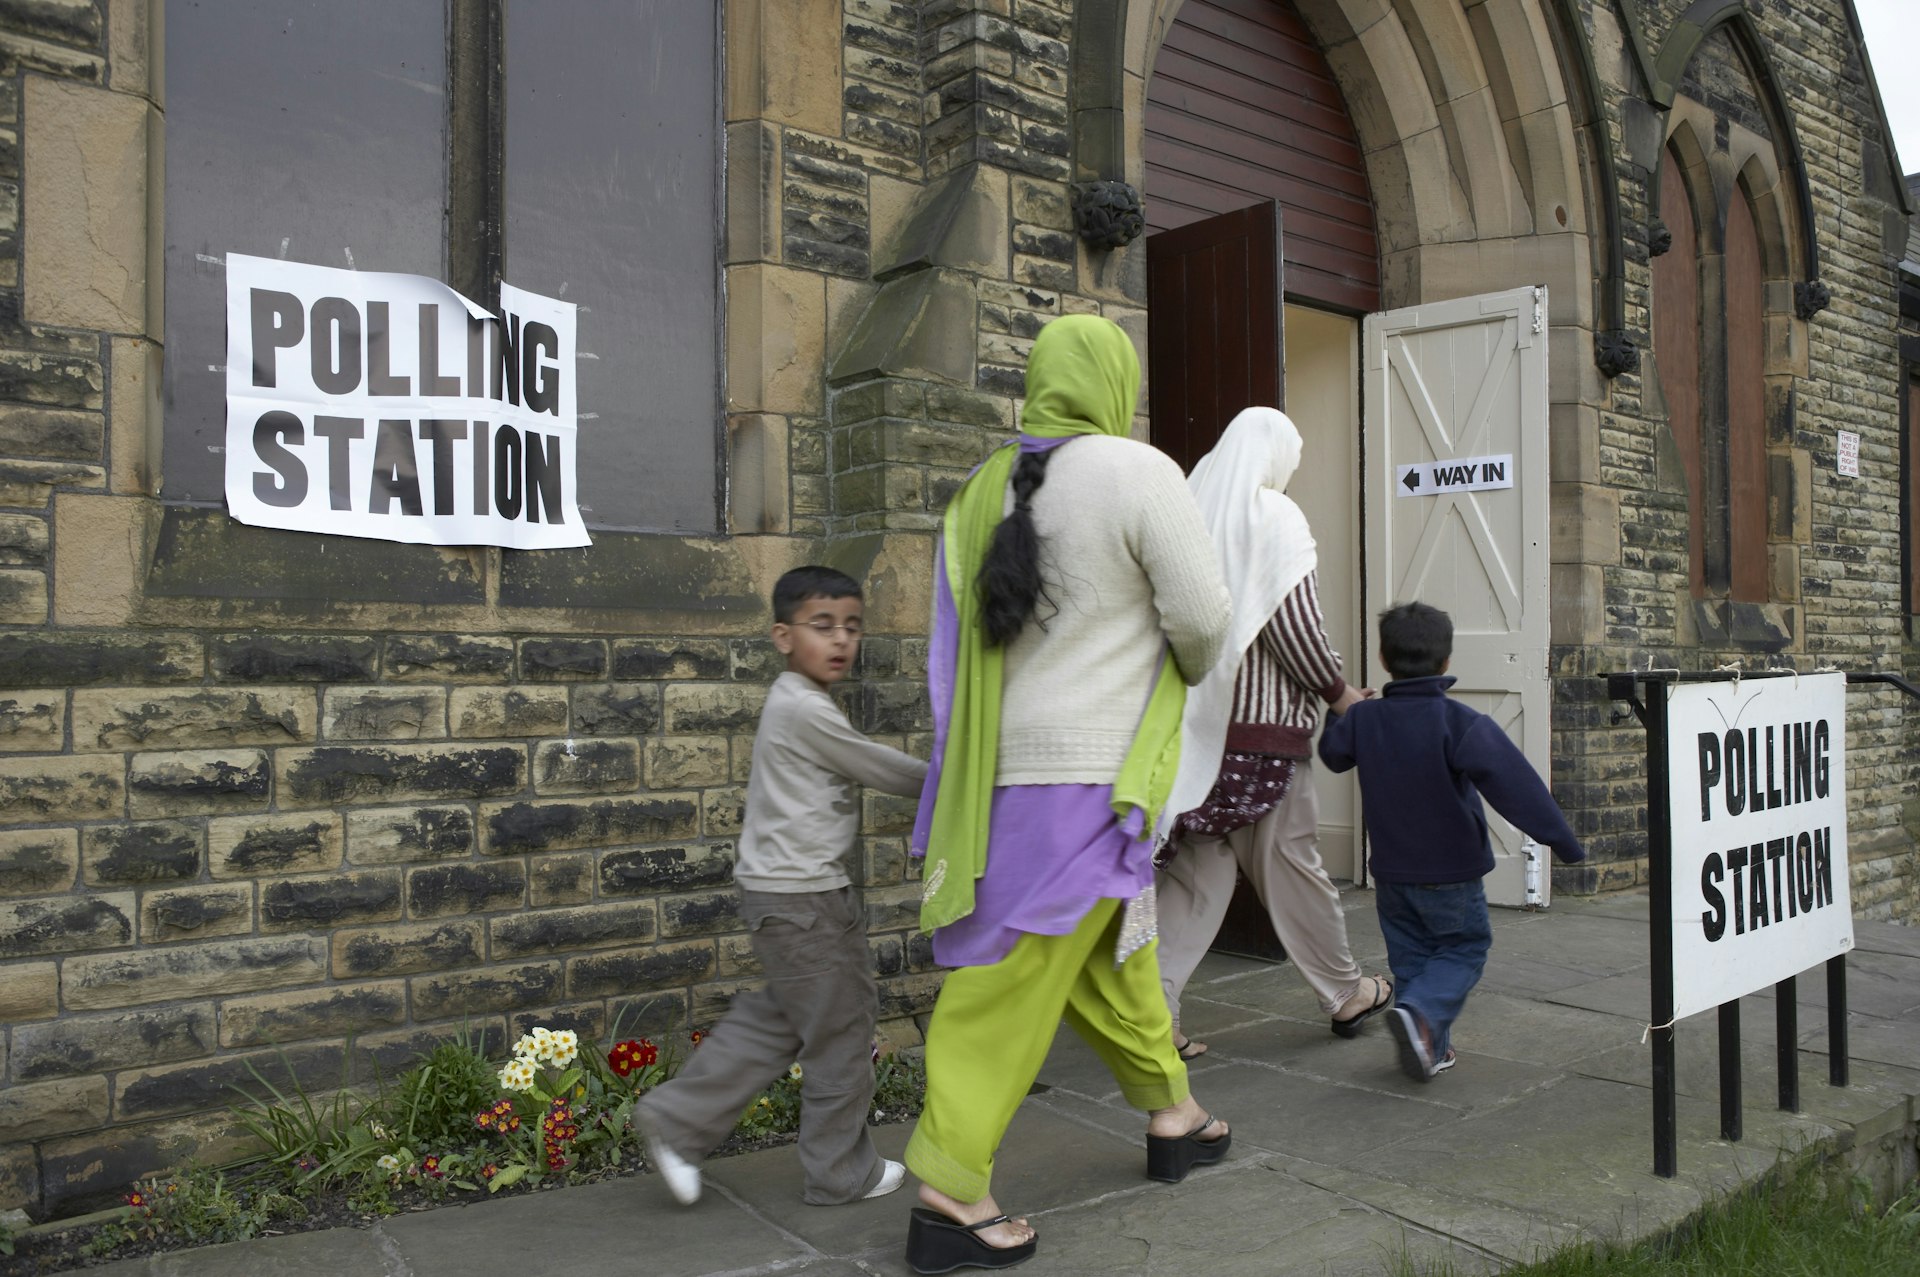 British Muslims are being demonised for voting